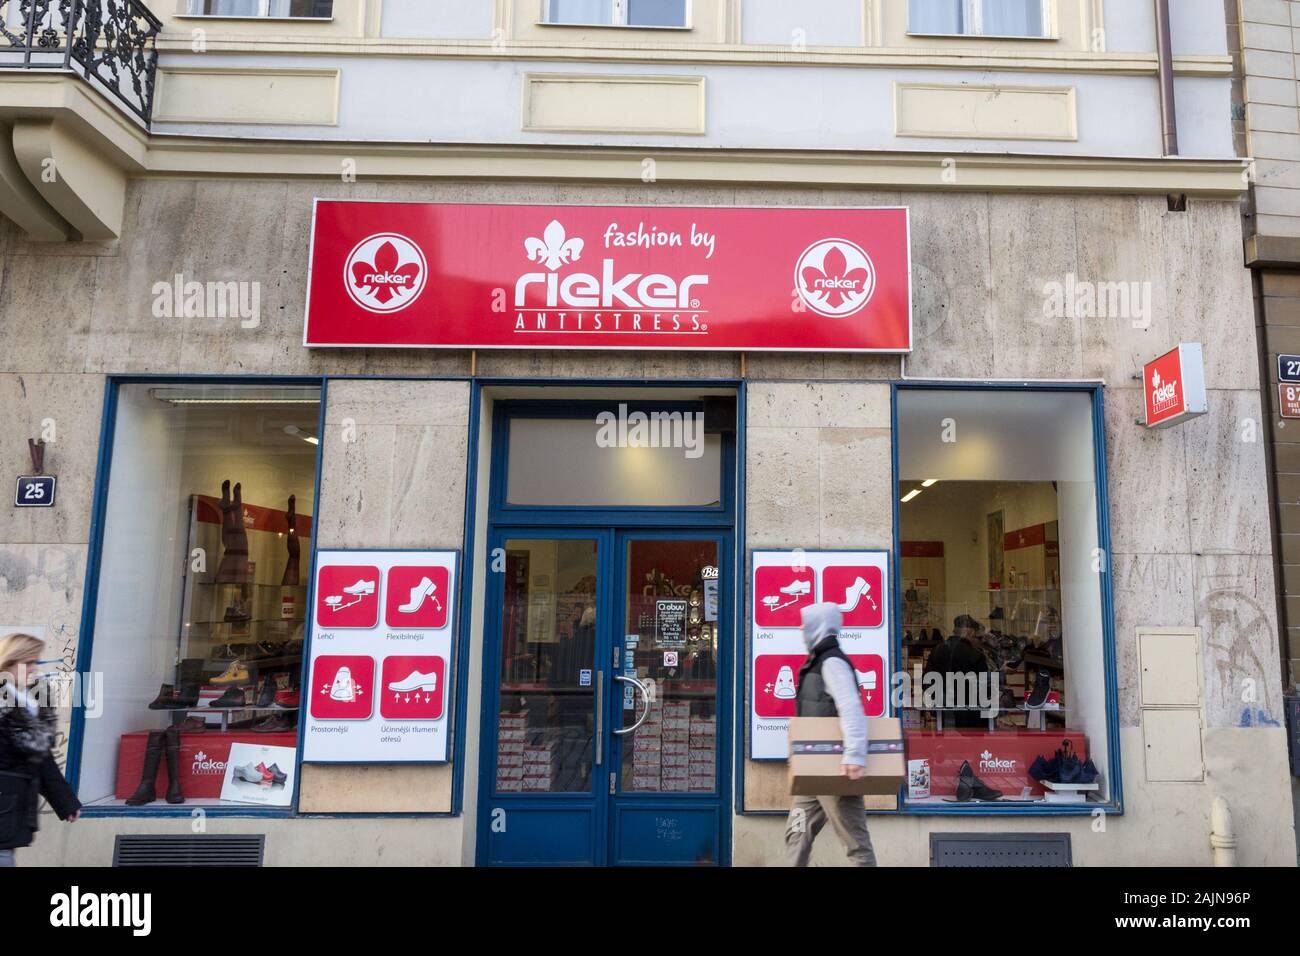 PRAGUE, CZECHIA - OCTOBER 31, 2019: Logo of Rieker Shoes in front of their  store for Prague. Rieker antistress is a German brand of shoes manufacturer  Stock Photo - Alamy